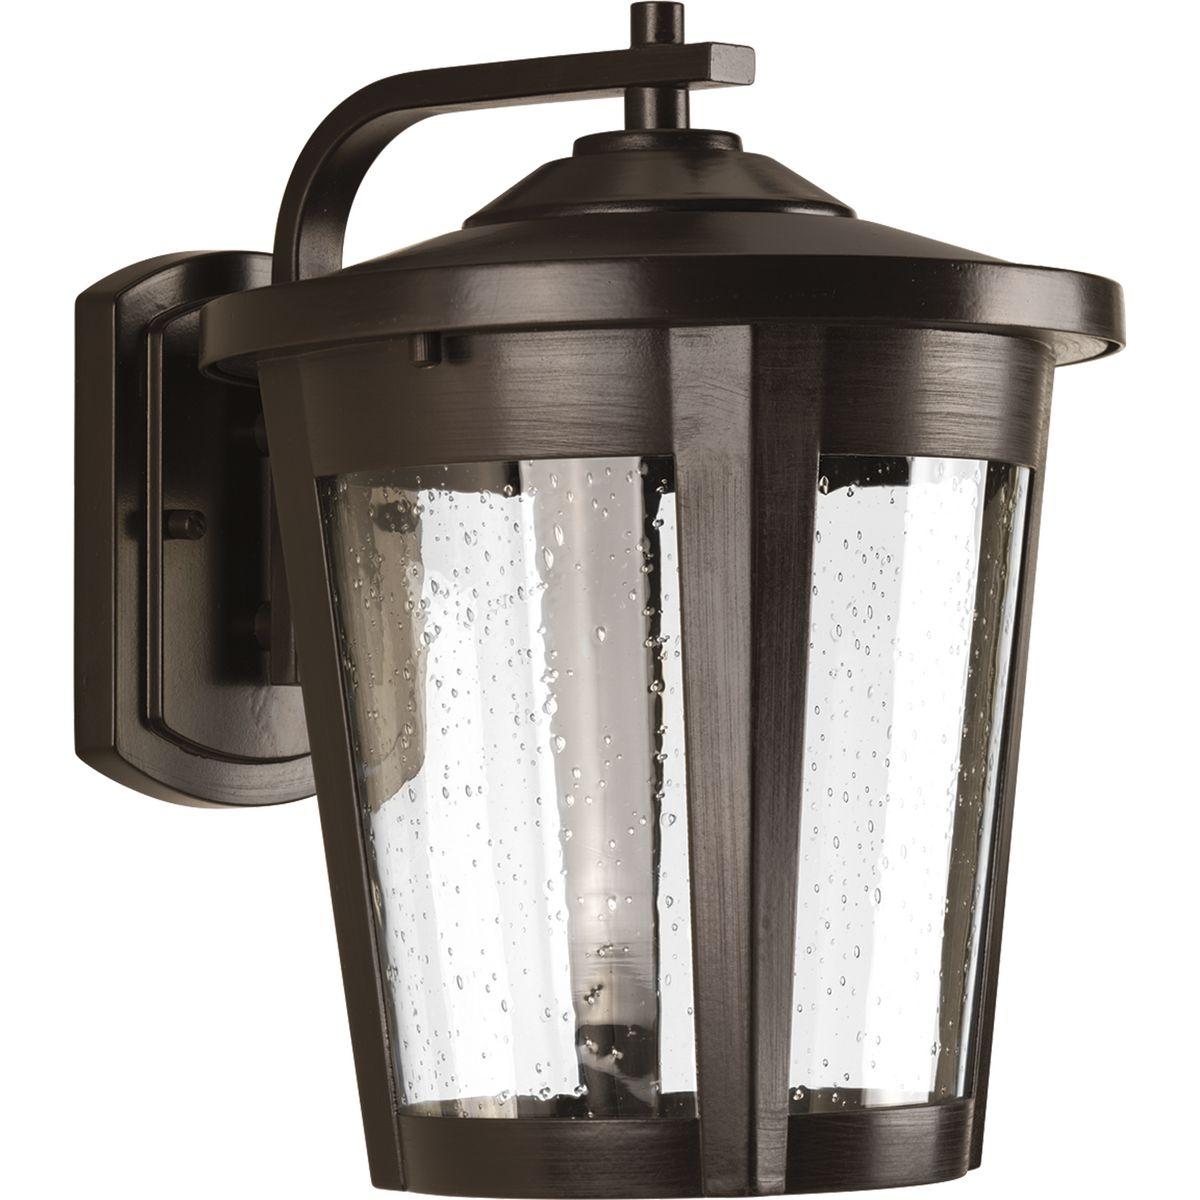 Hubbell P6079-2030K9 The East Haven LED Collection offers modern styling to complement a wide variety of home styles. The one-light large LED outdoor wall lantern has an Antique Bronze frame that cradles a seeded glass shade. 120V AC replaceable LED module, 1,211 lumens 71.2 